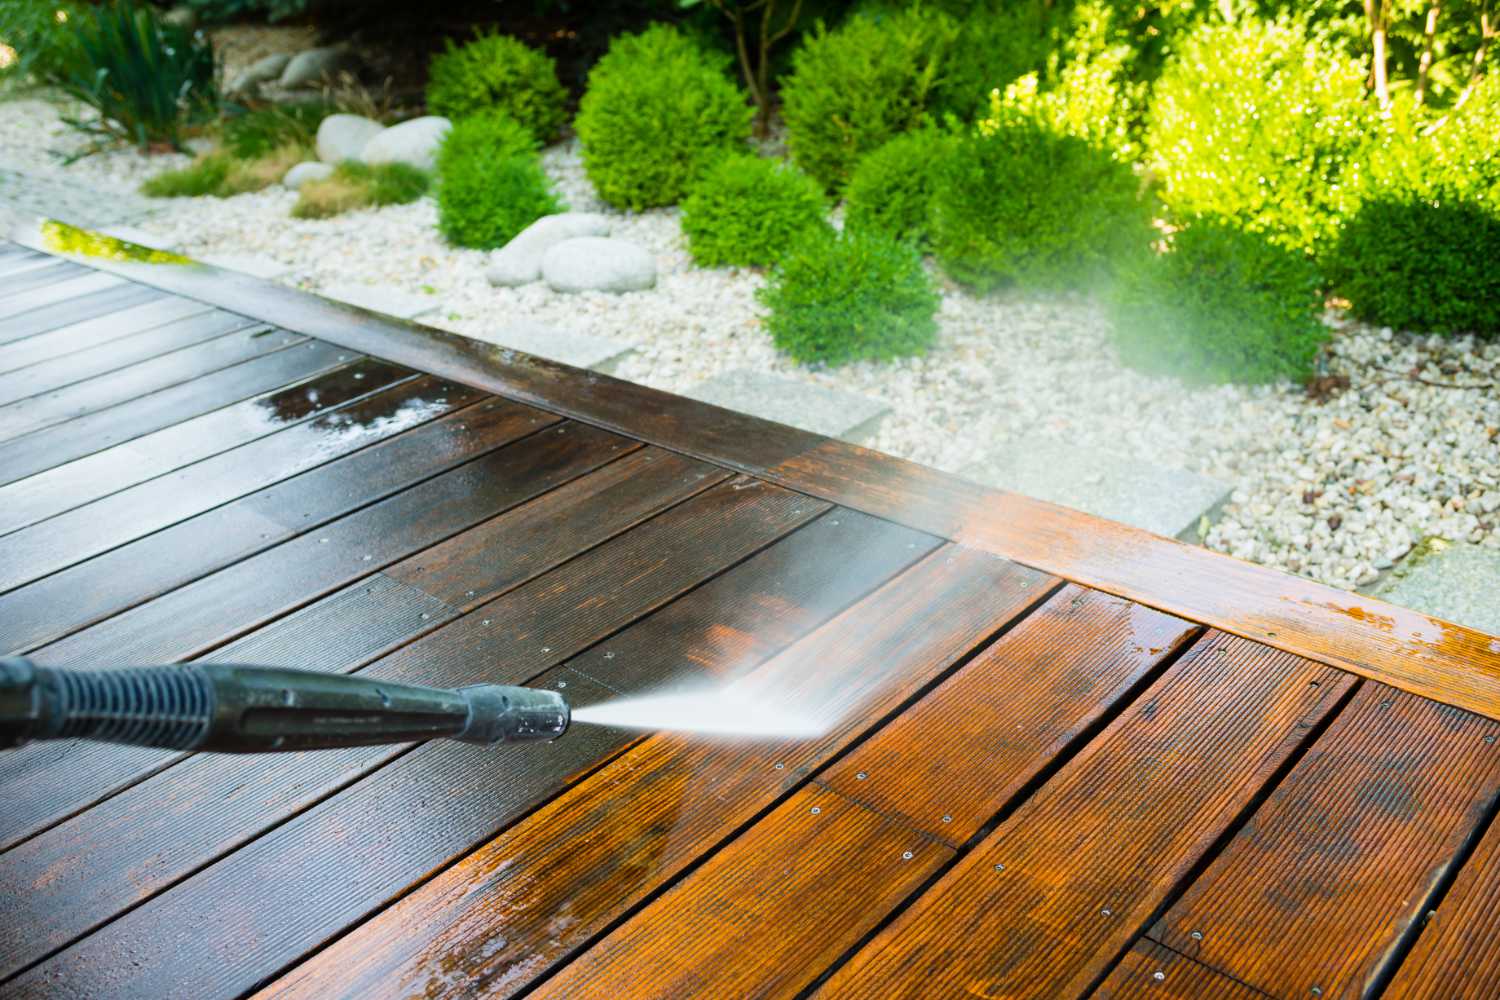 10 tips for outdoor cleaning this summer